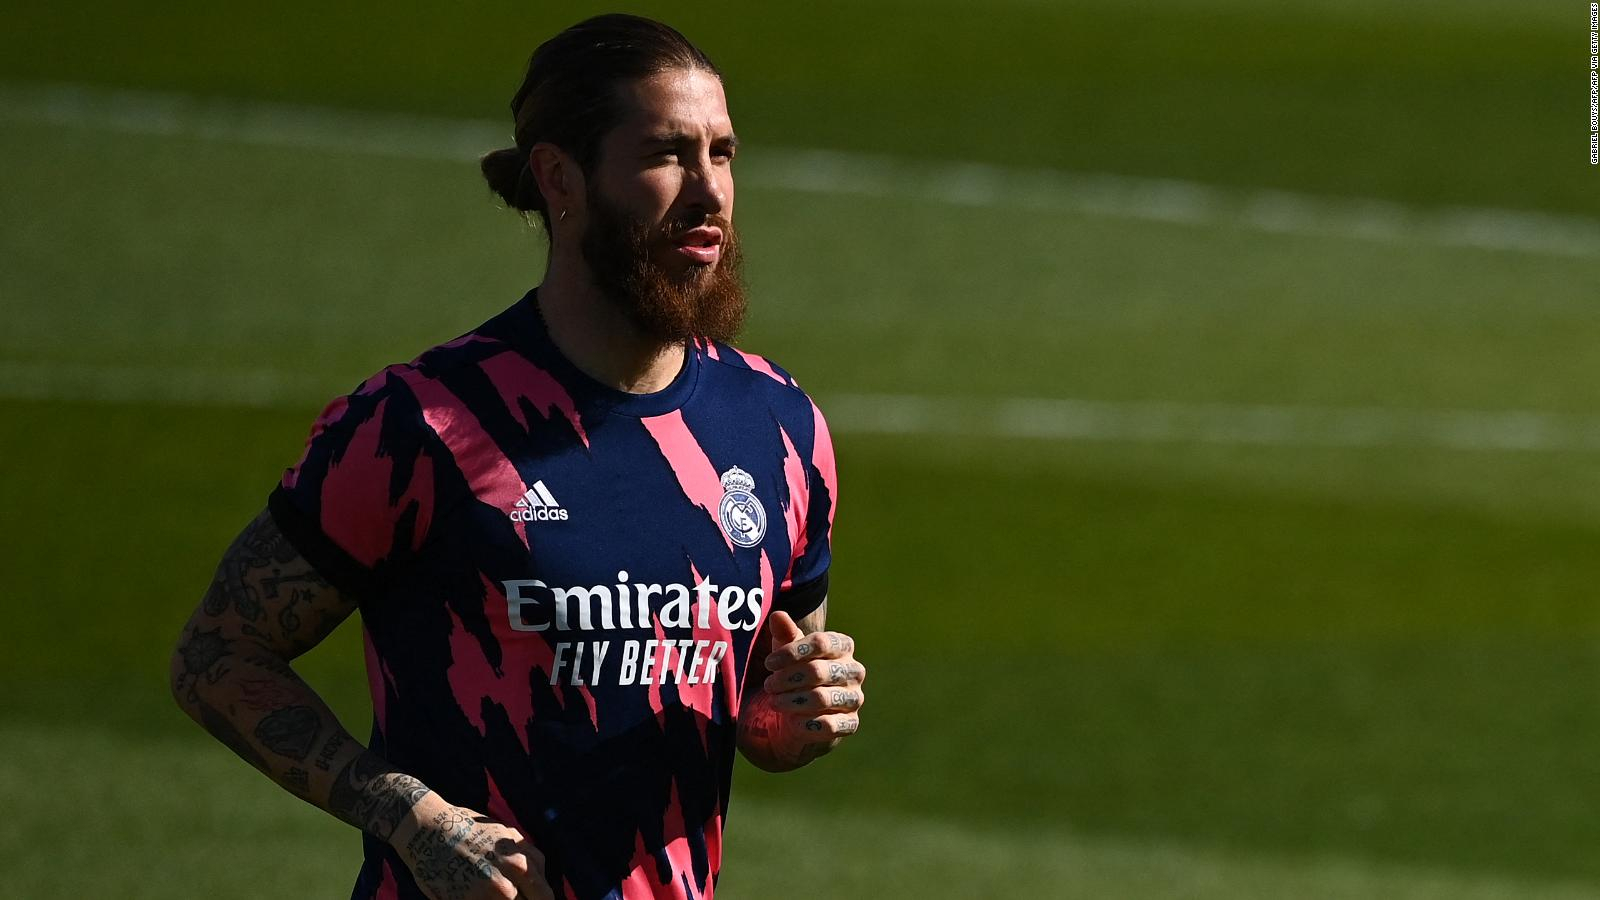 Real Madrid and defender Sergio Ramos struggle to sign on a new deal